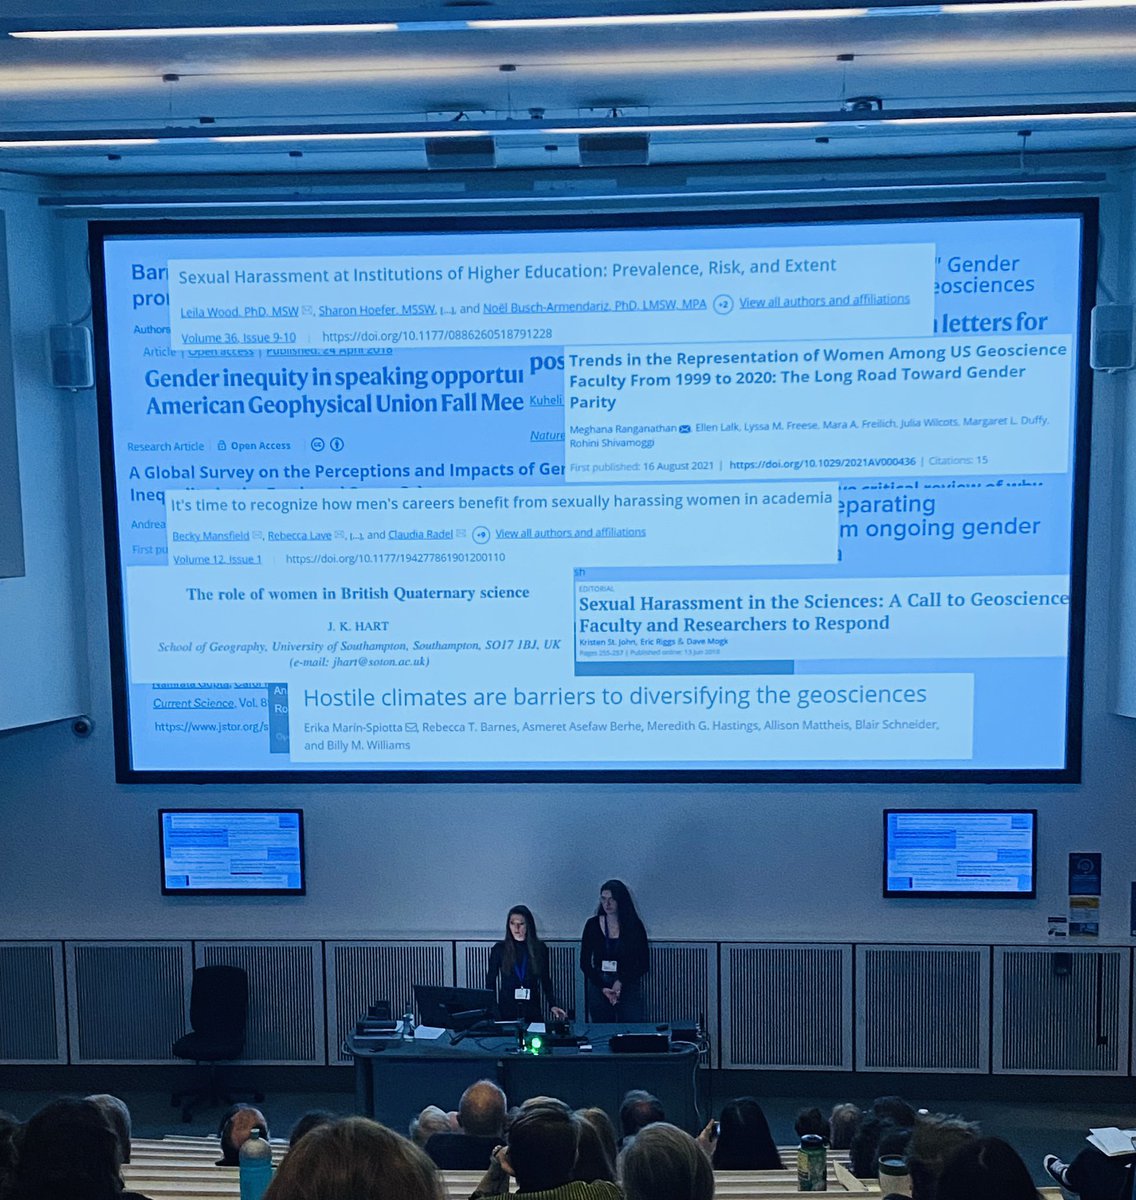 Bravo to two amazing ECRs @RosieArcherr & @TessaSpano for keeping the conversation going on the barriers to women in (Quaternary) geosciences - excellent talk ladies ! @QuaternaryRA_UK #QRA24 @sheffielduni